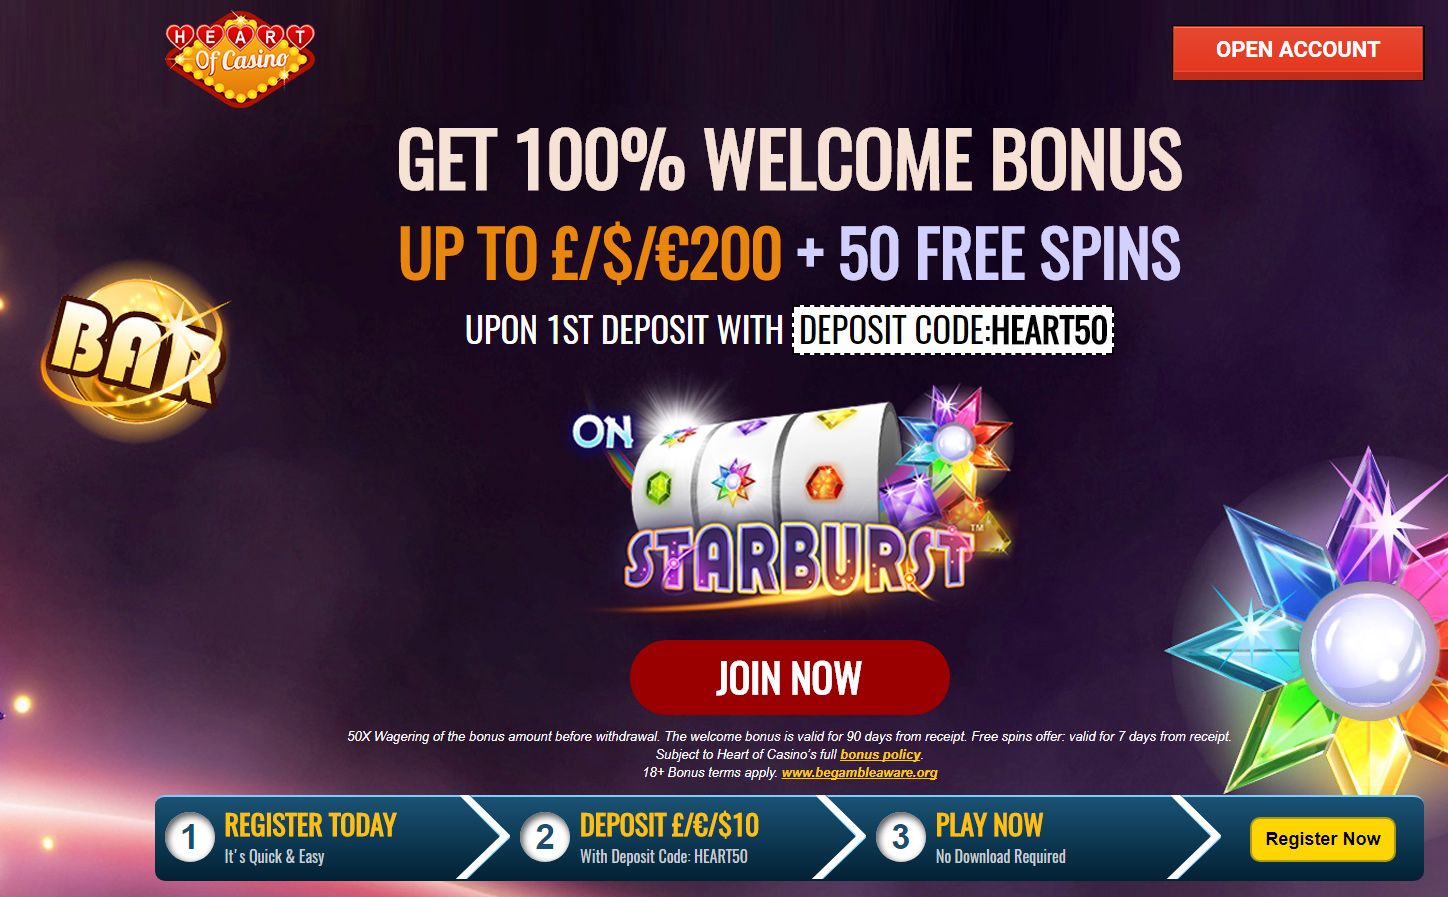 best casino sites that accept credit cards to play games